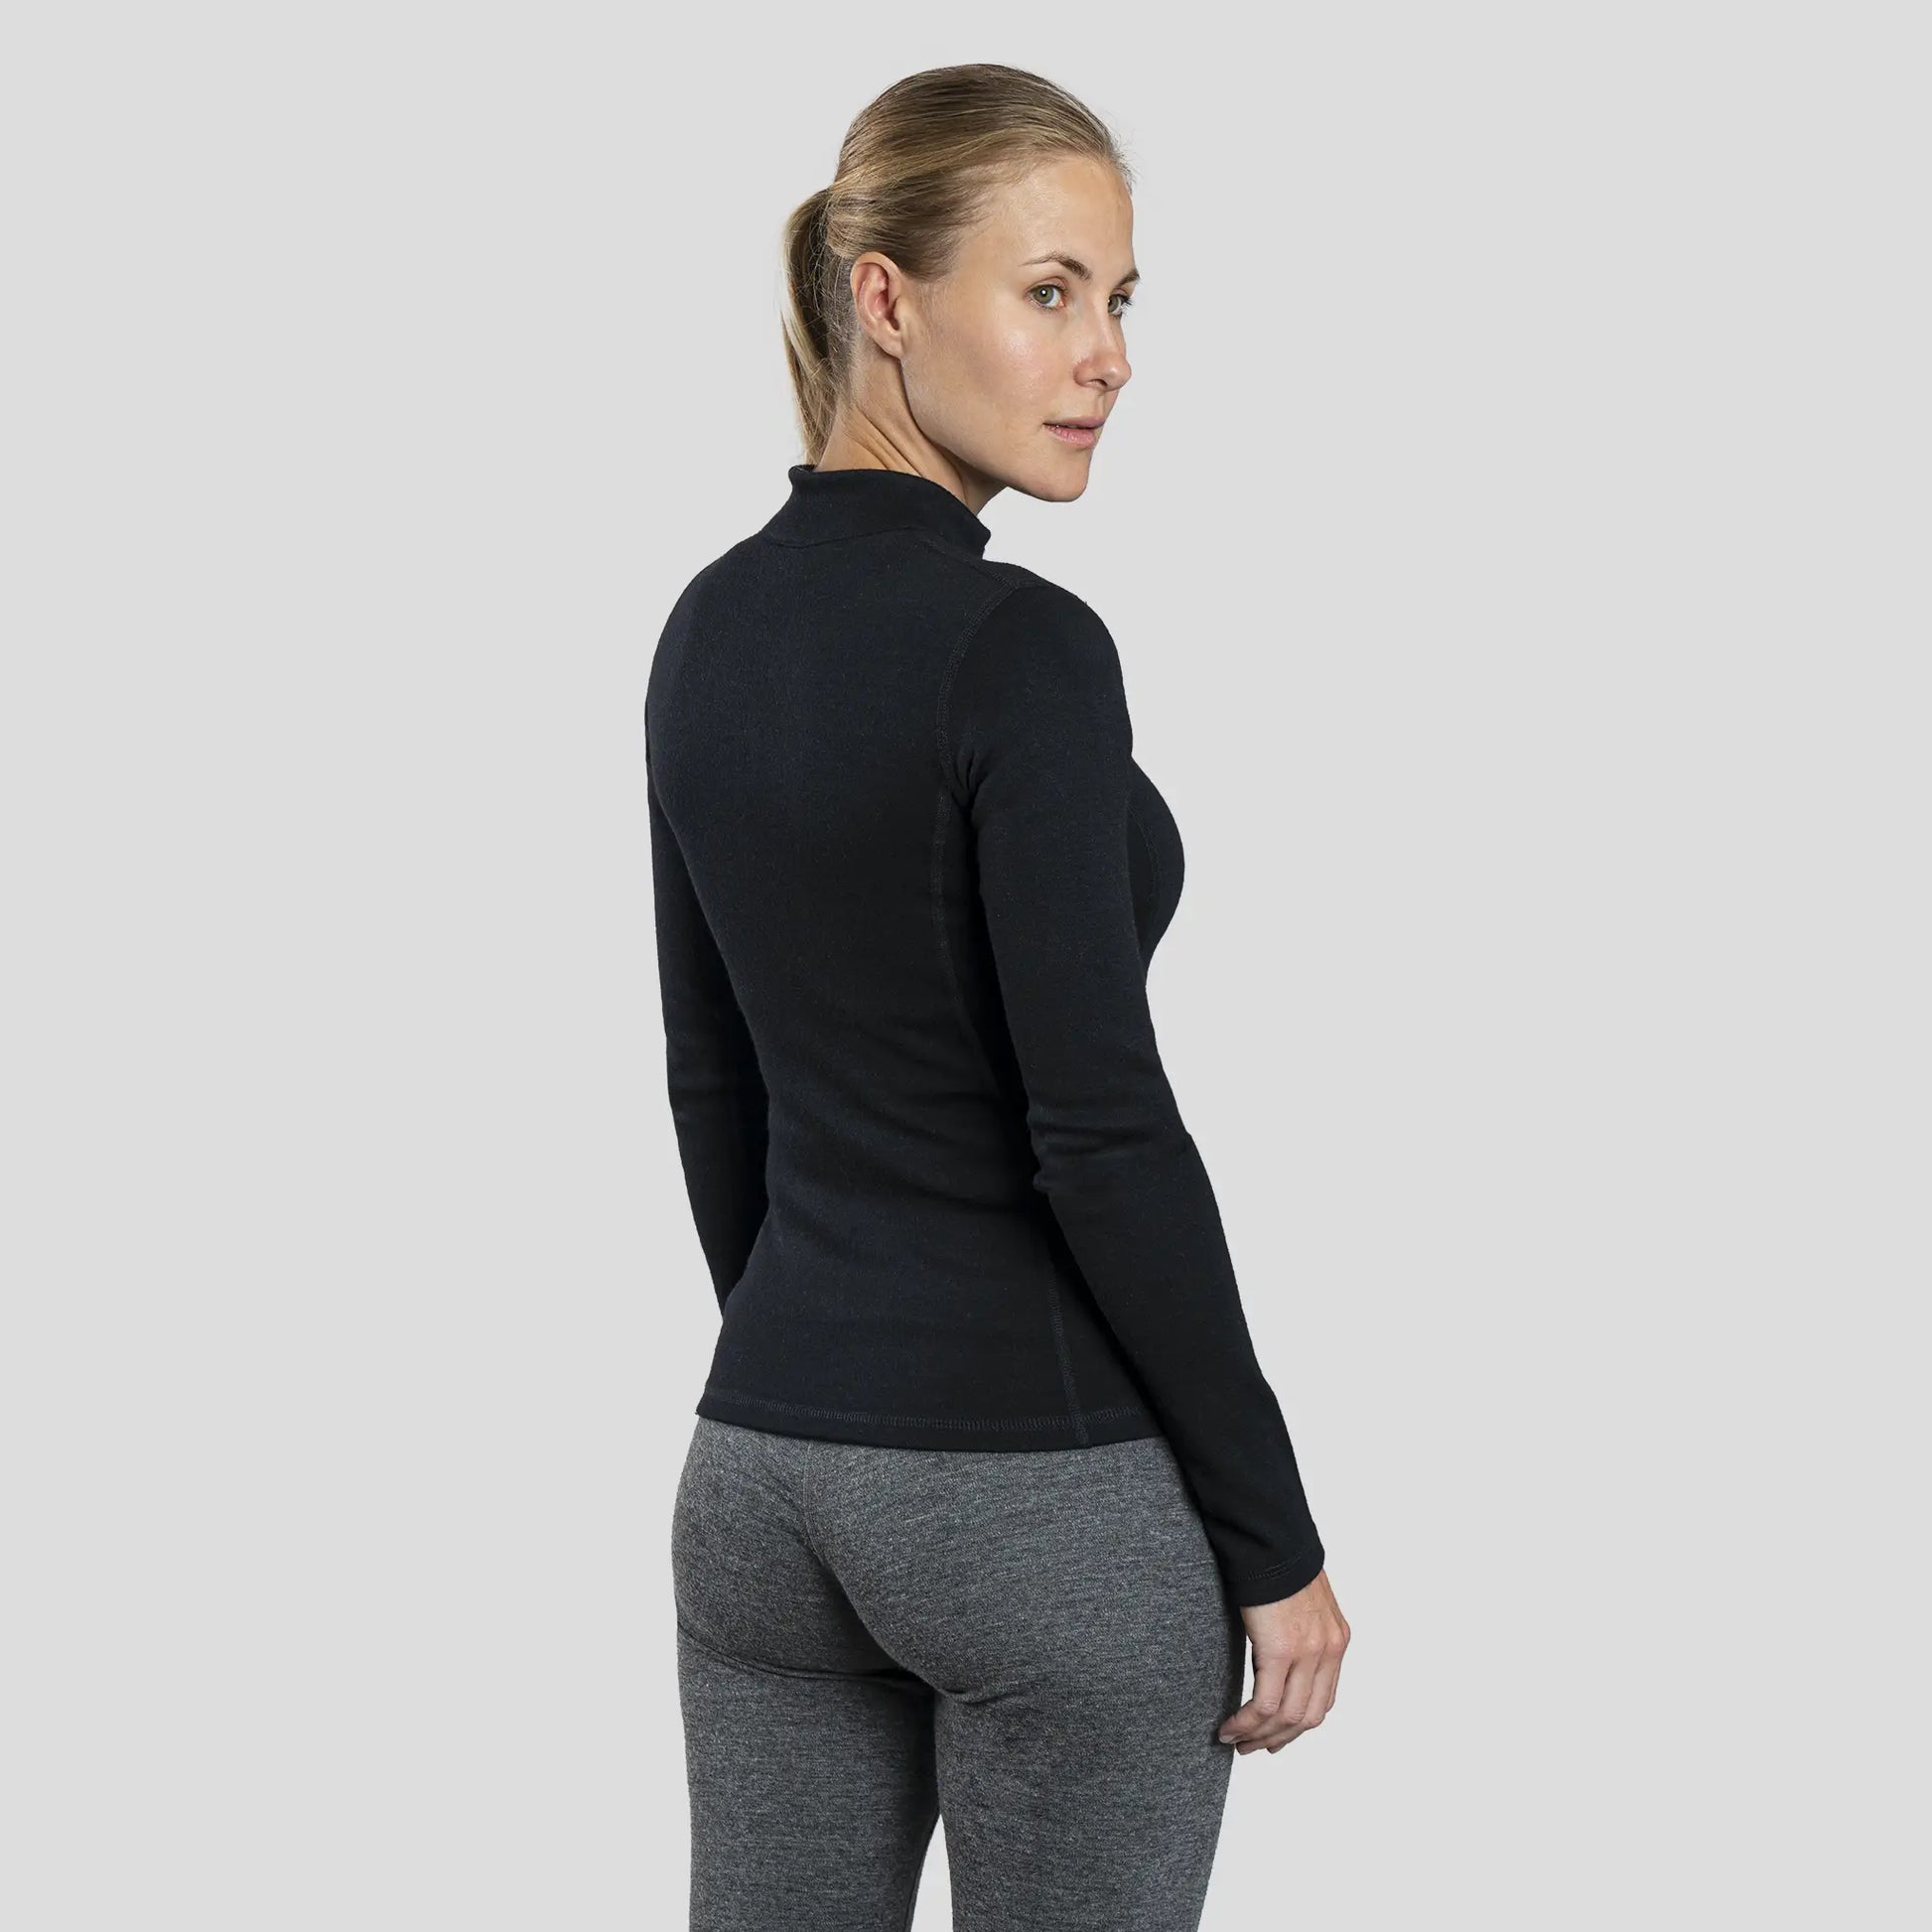 AWA Charcoal grey Turtle neck Long sleeve zipper jacket for Women Active  wear Dry fit Gym Yoga Running Sports